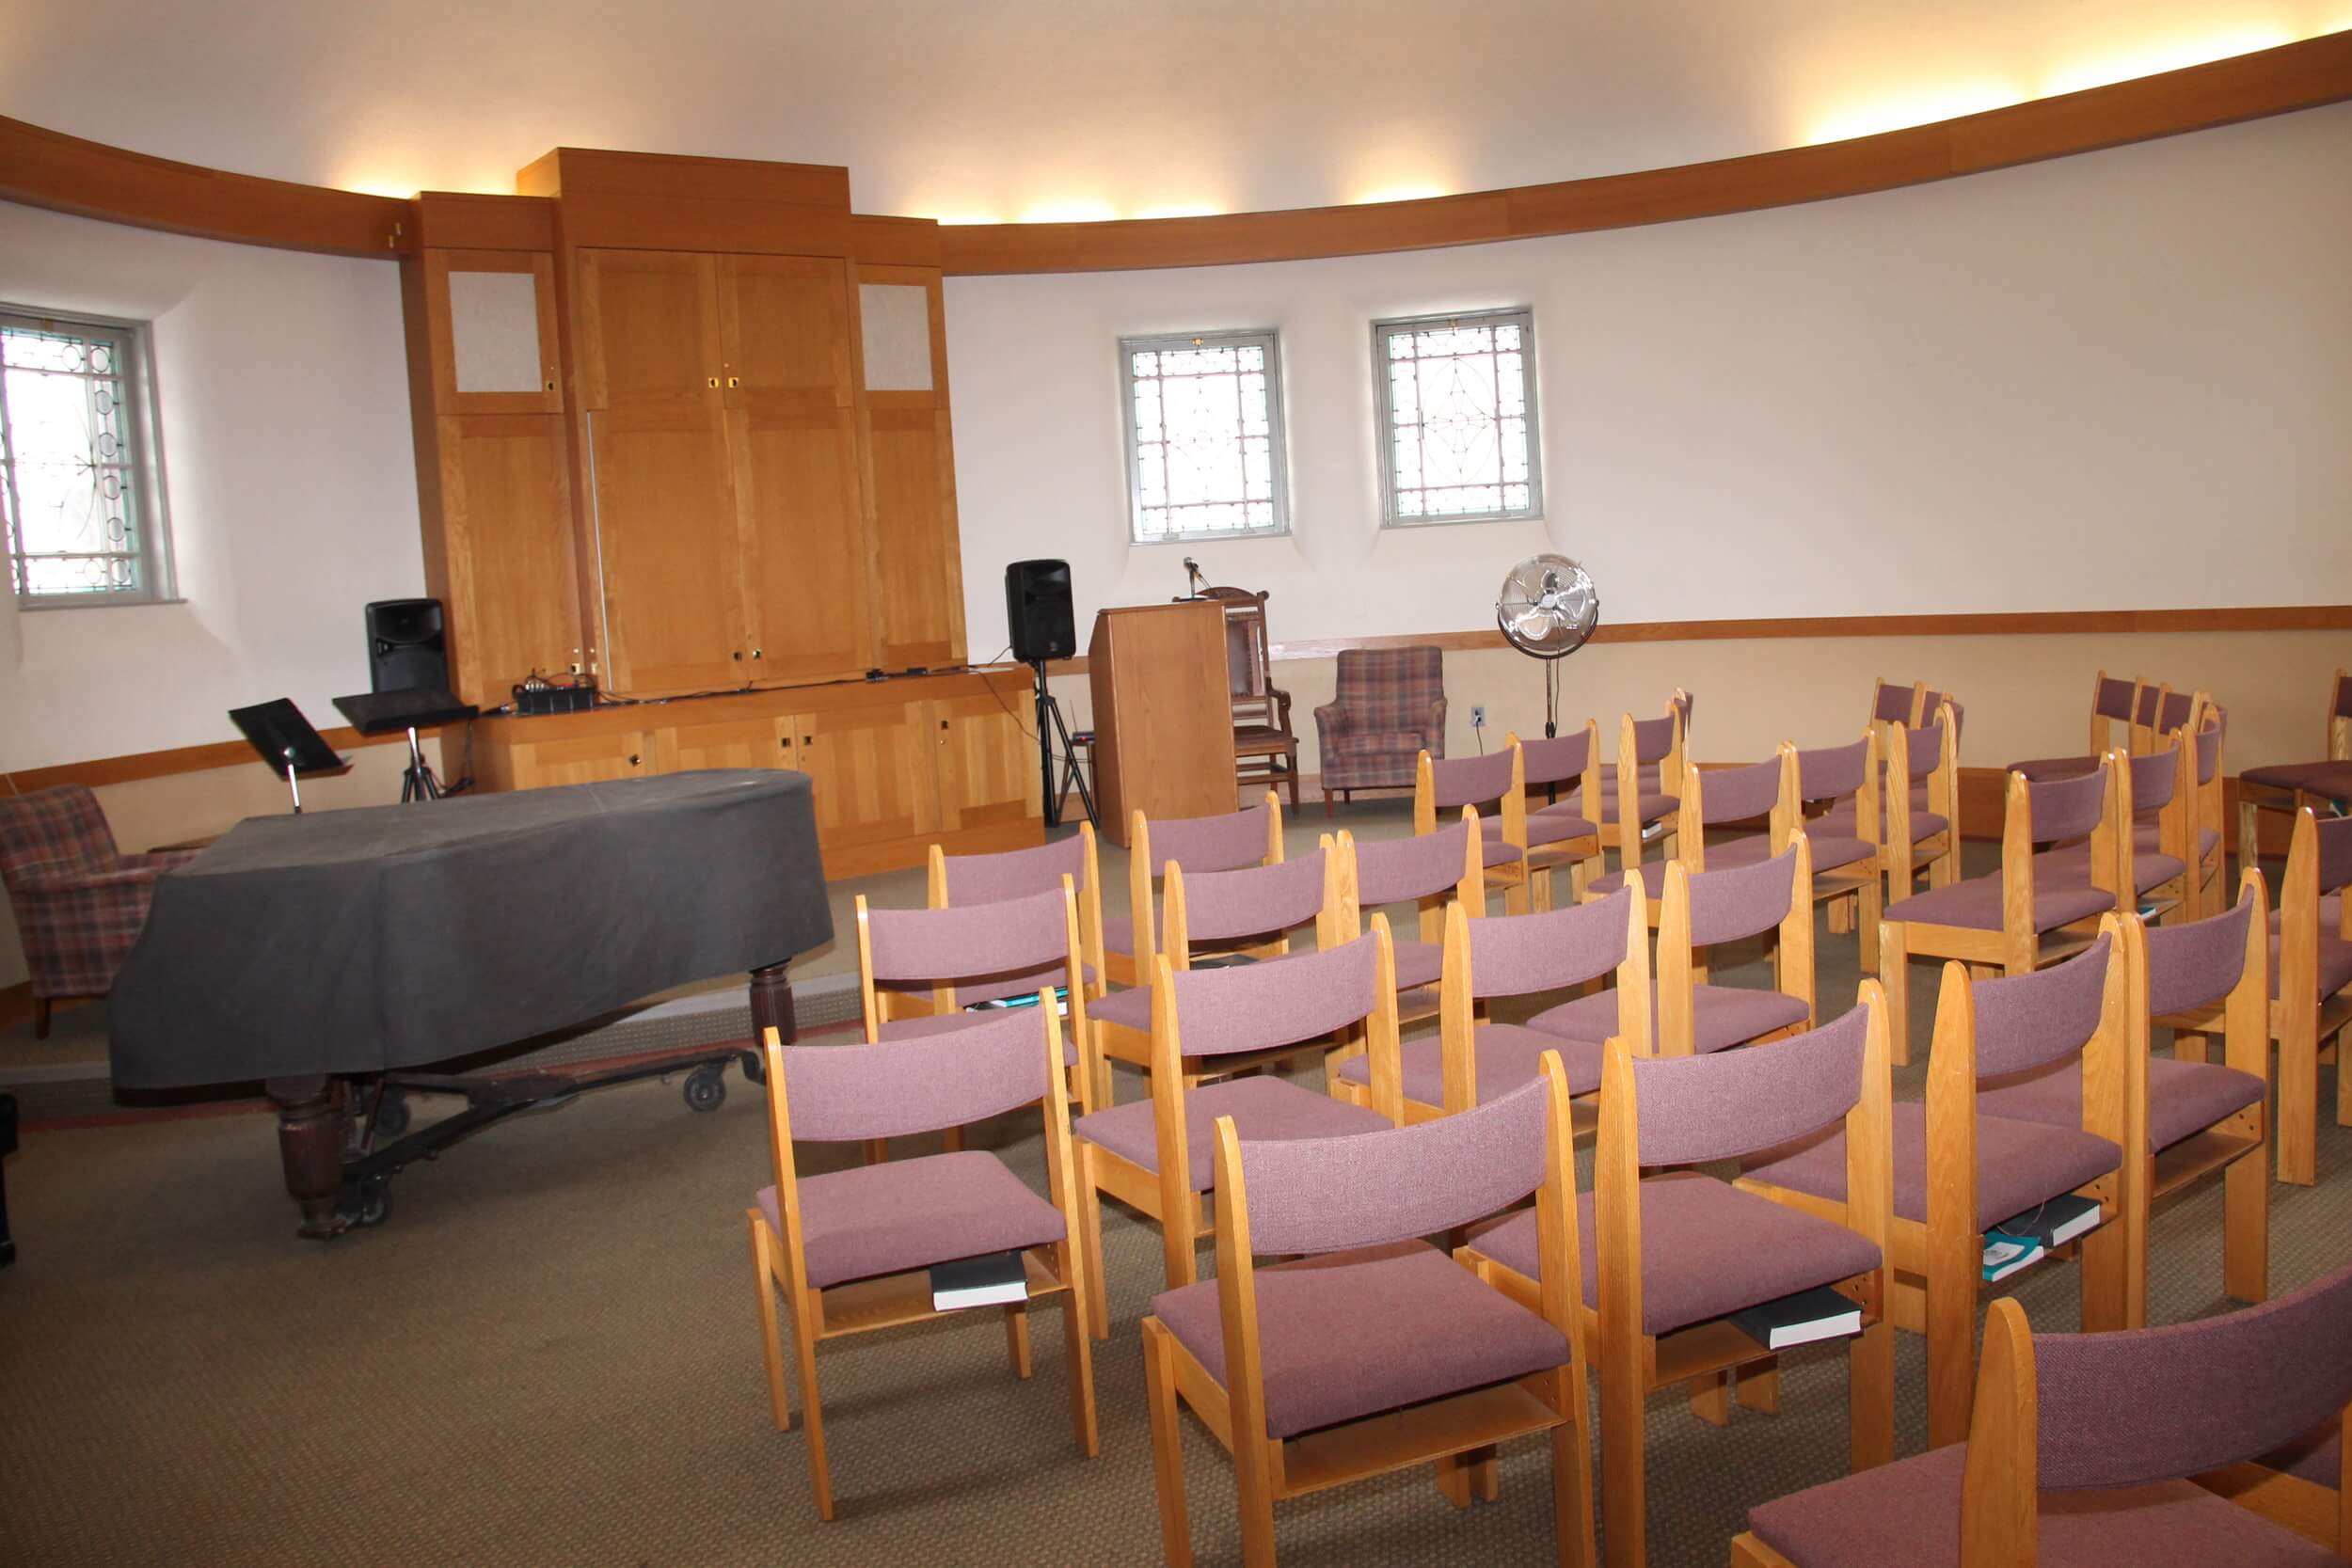  chapel cAPACITY: 70 $200/ 4 hours, $400/ 8 hours fOR NON-MEMBERS $150/ 4 hours, $300/ 8 hours fOR MEMBERS 